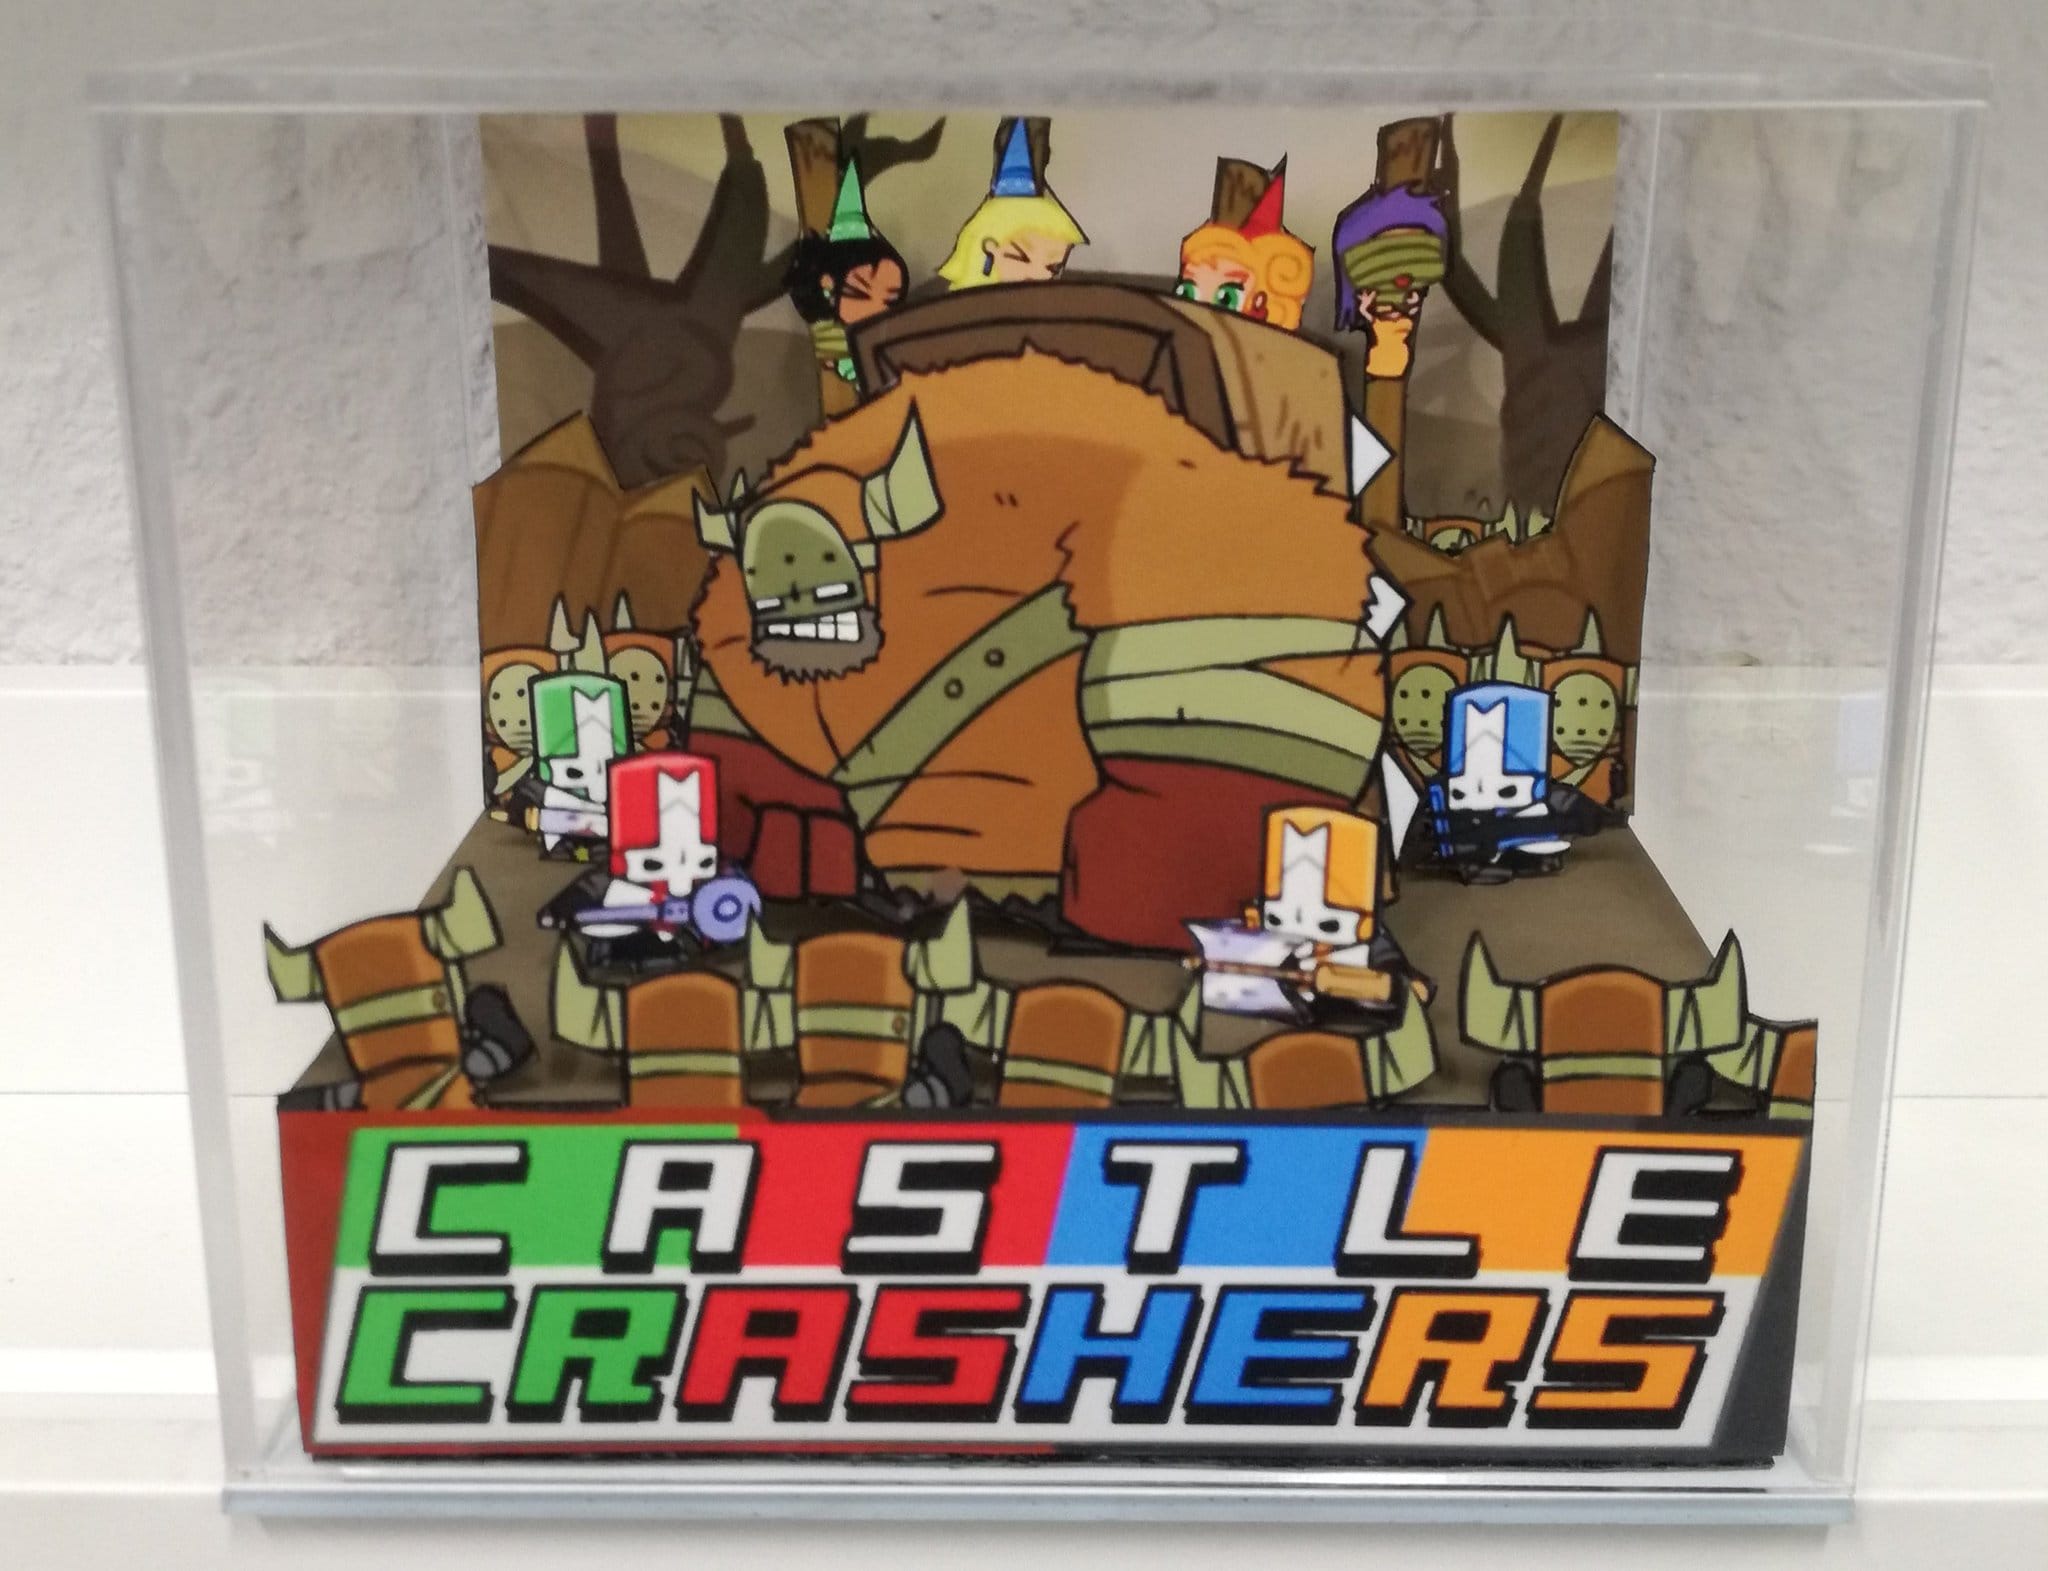 Castle crashers, Character design, Characters inspiration drawing